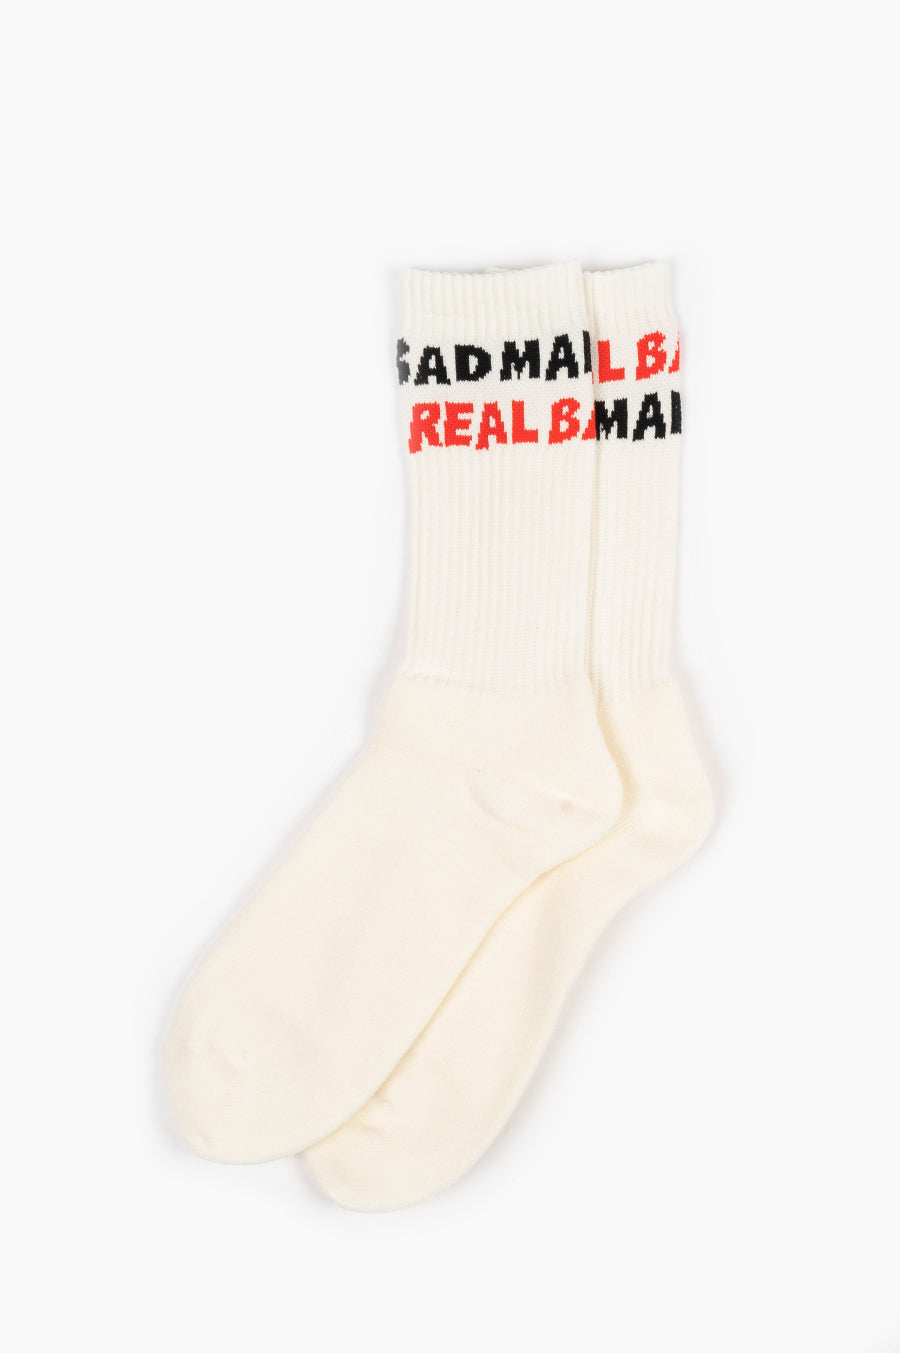 REAL BAD MAN SPELLOUT SOCKS RED BLACK